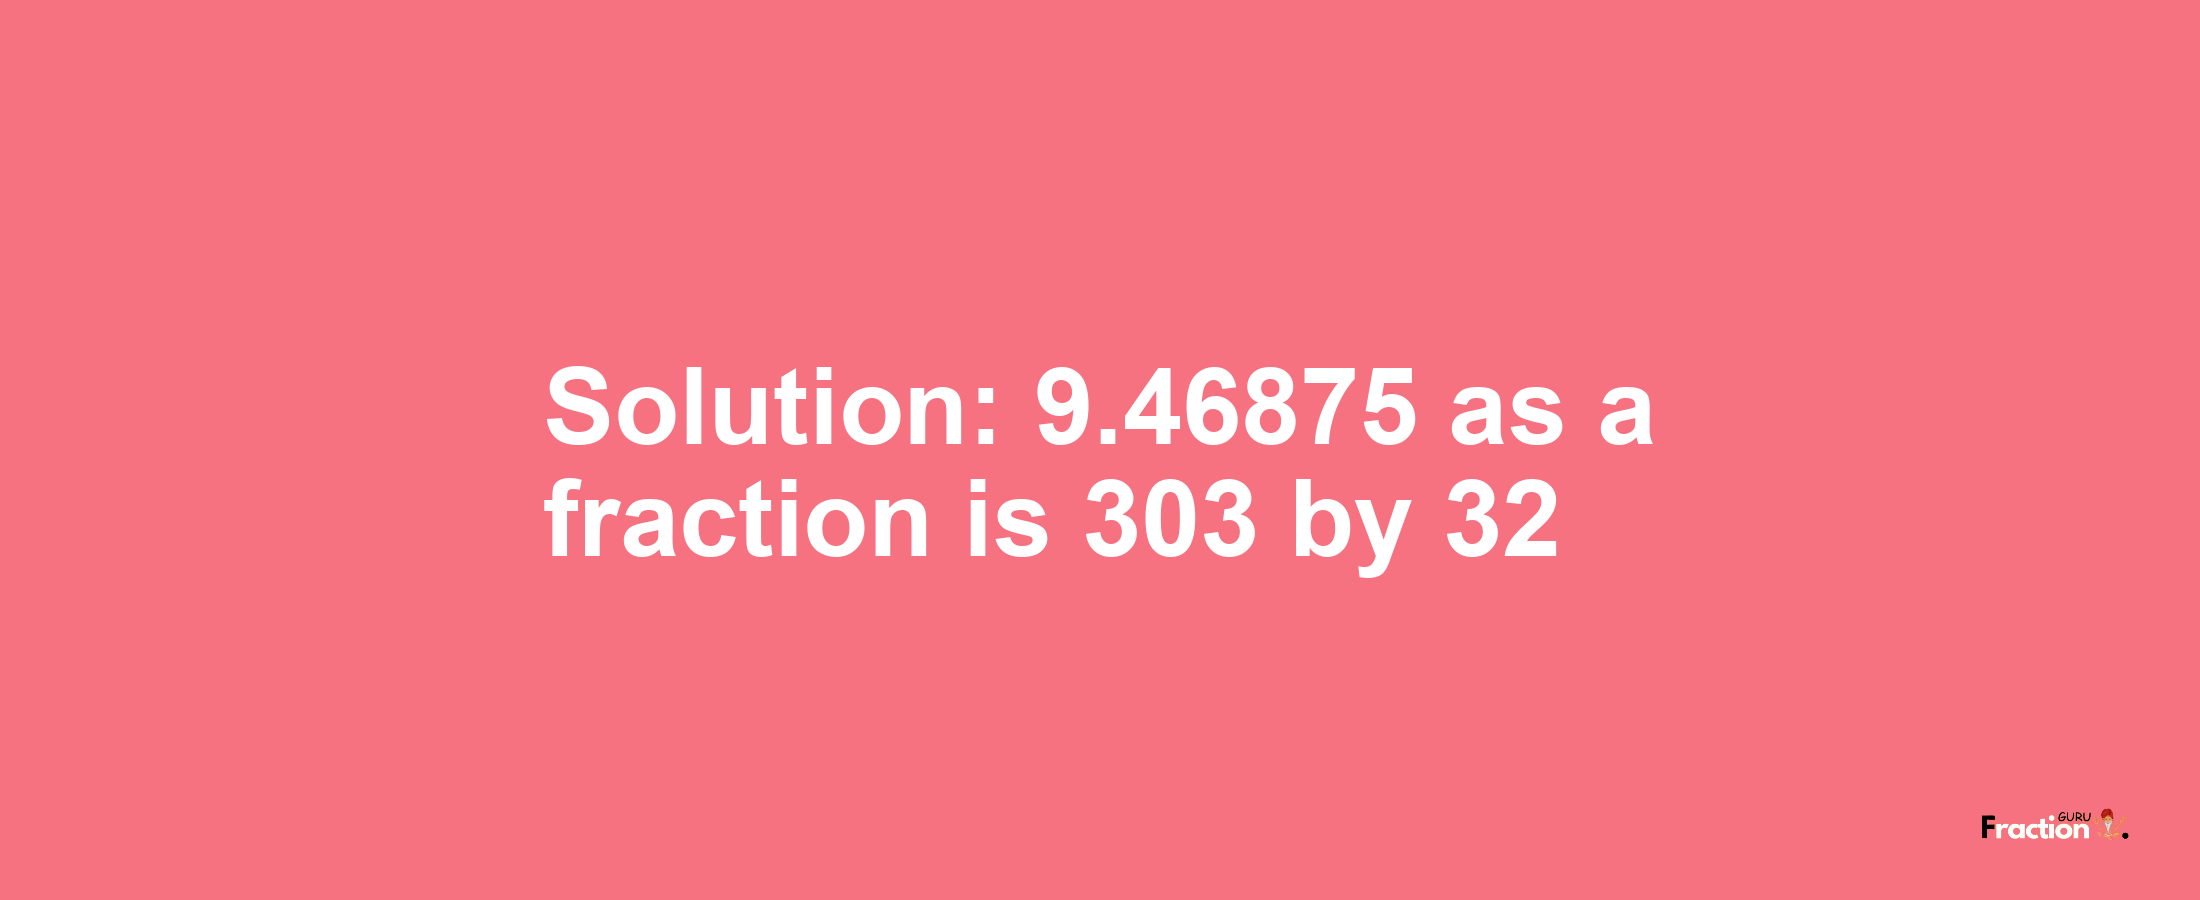 Solution:9.46875 as a fraction is 303/32